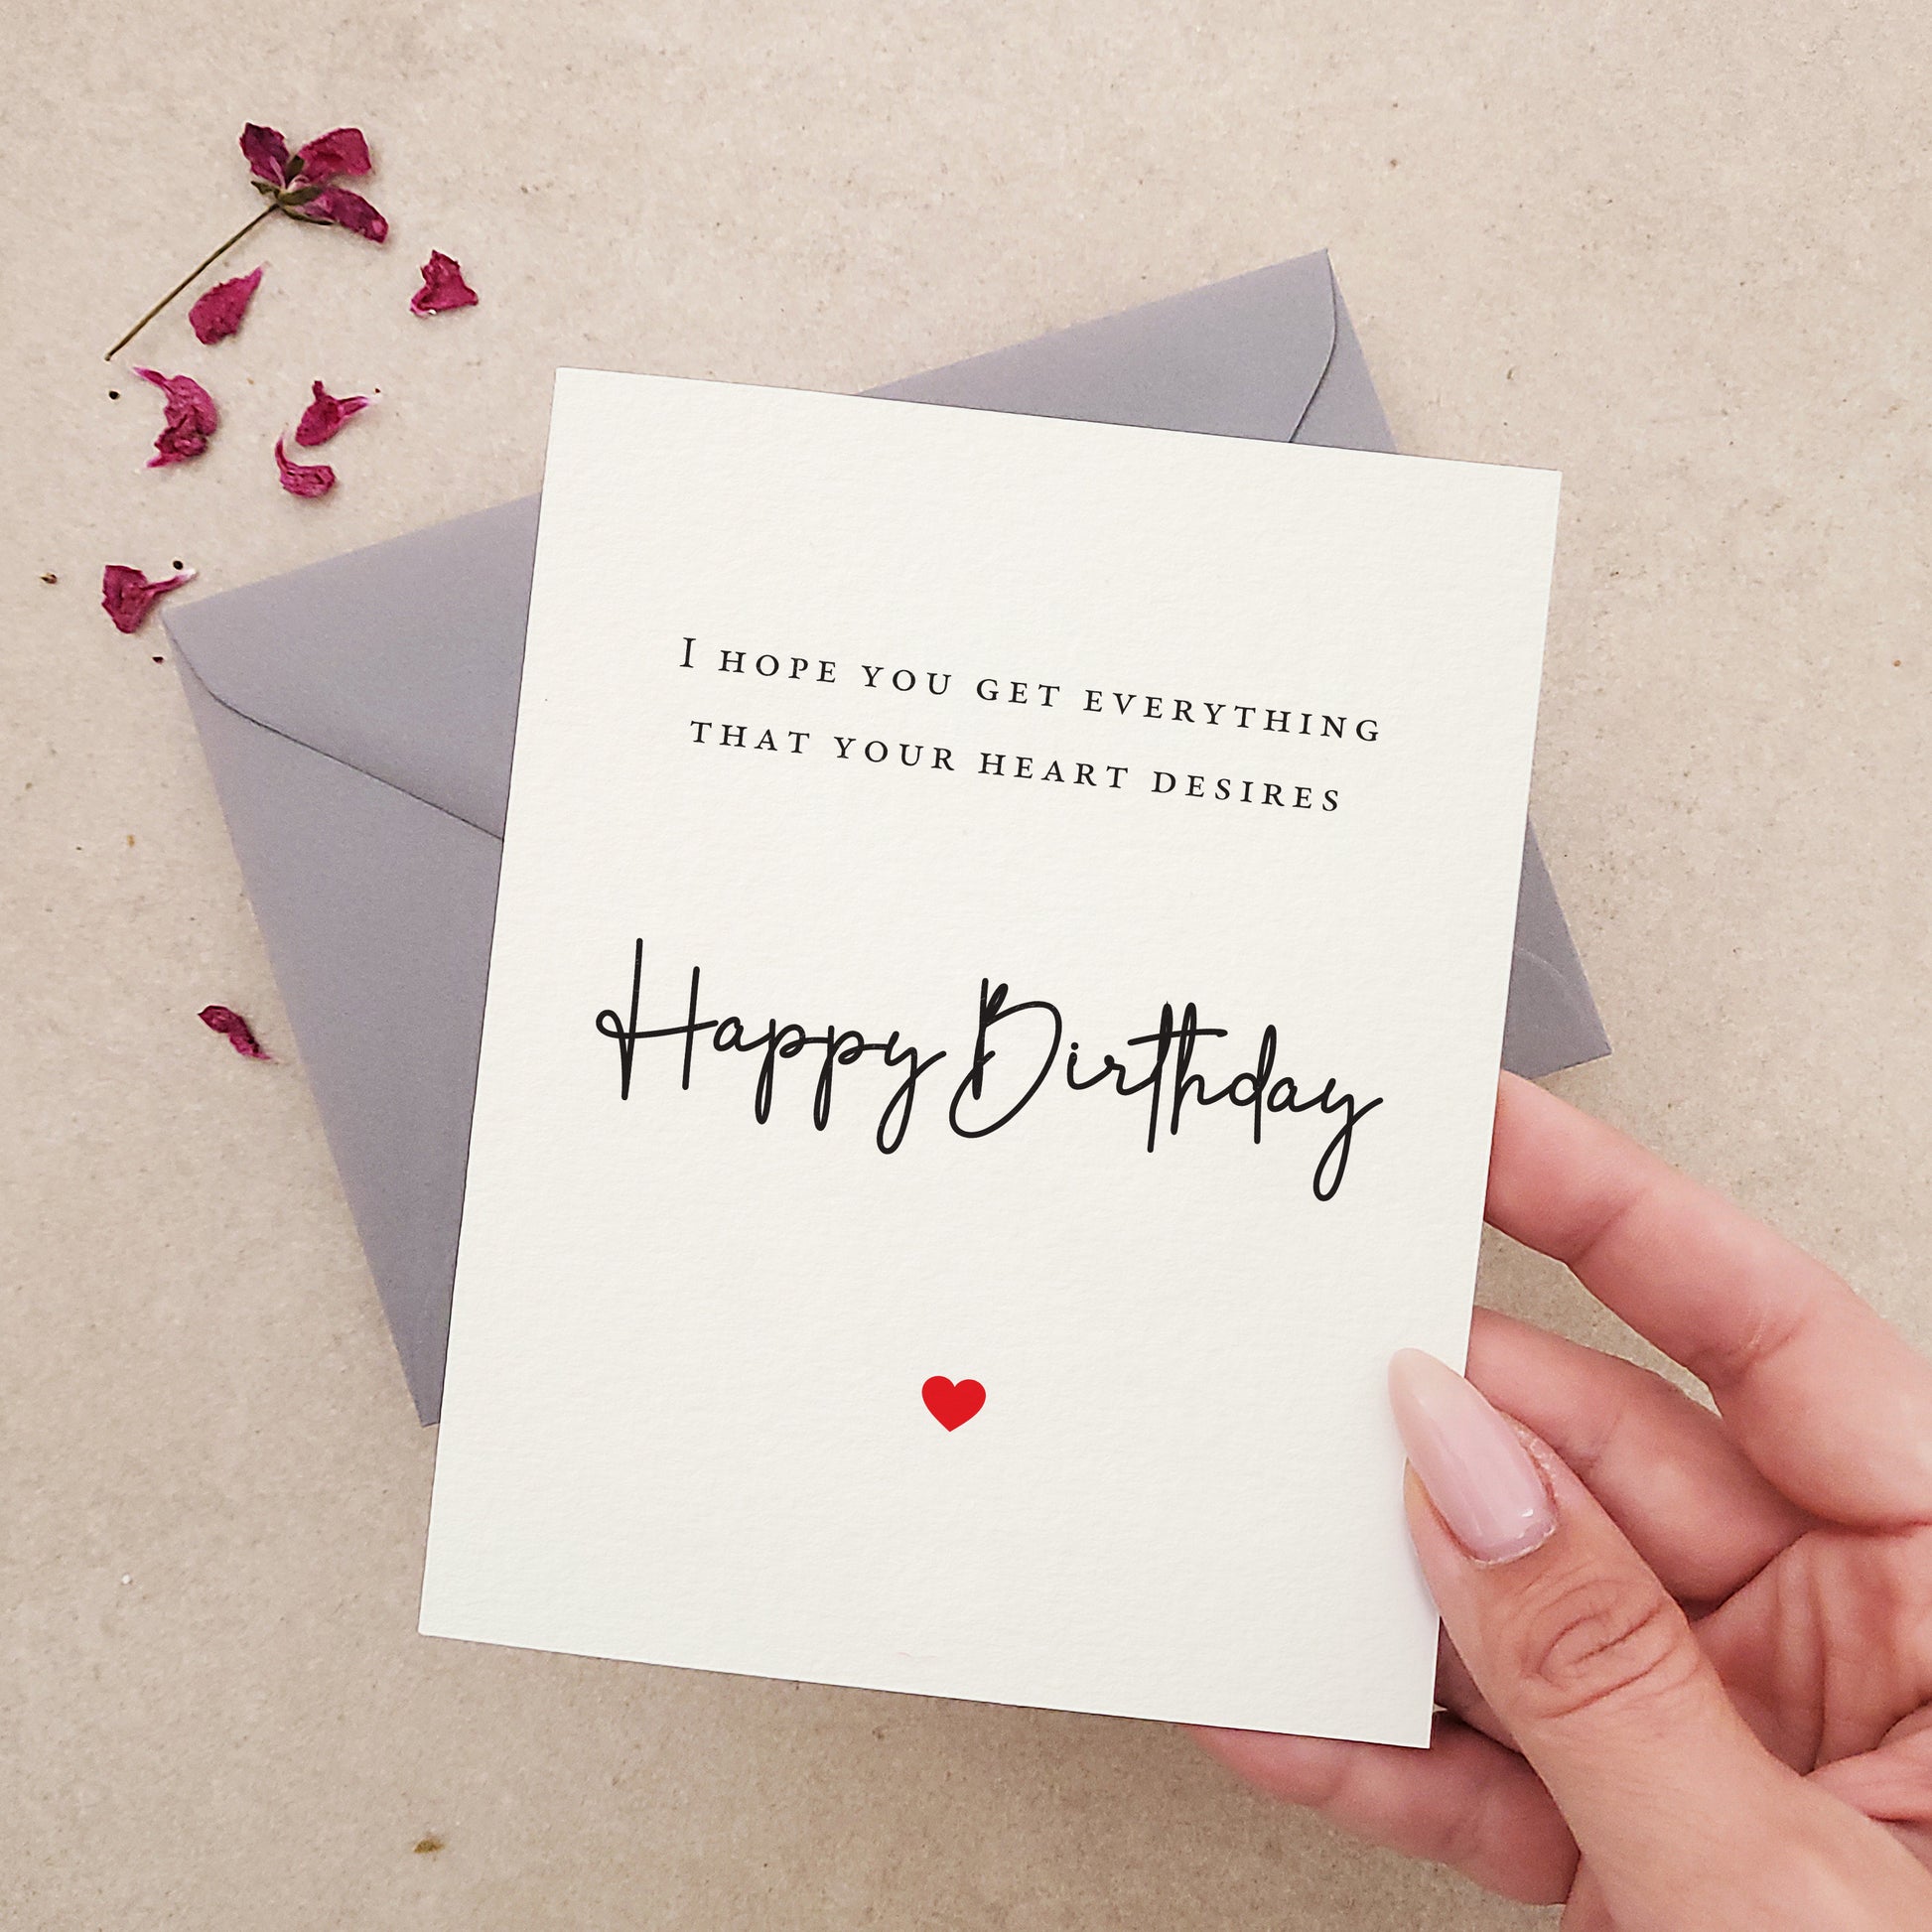 personalized I hope you get everything that your heart desires birthday card - XOXOKristen